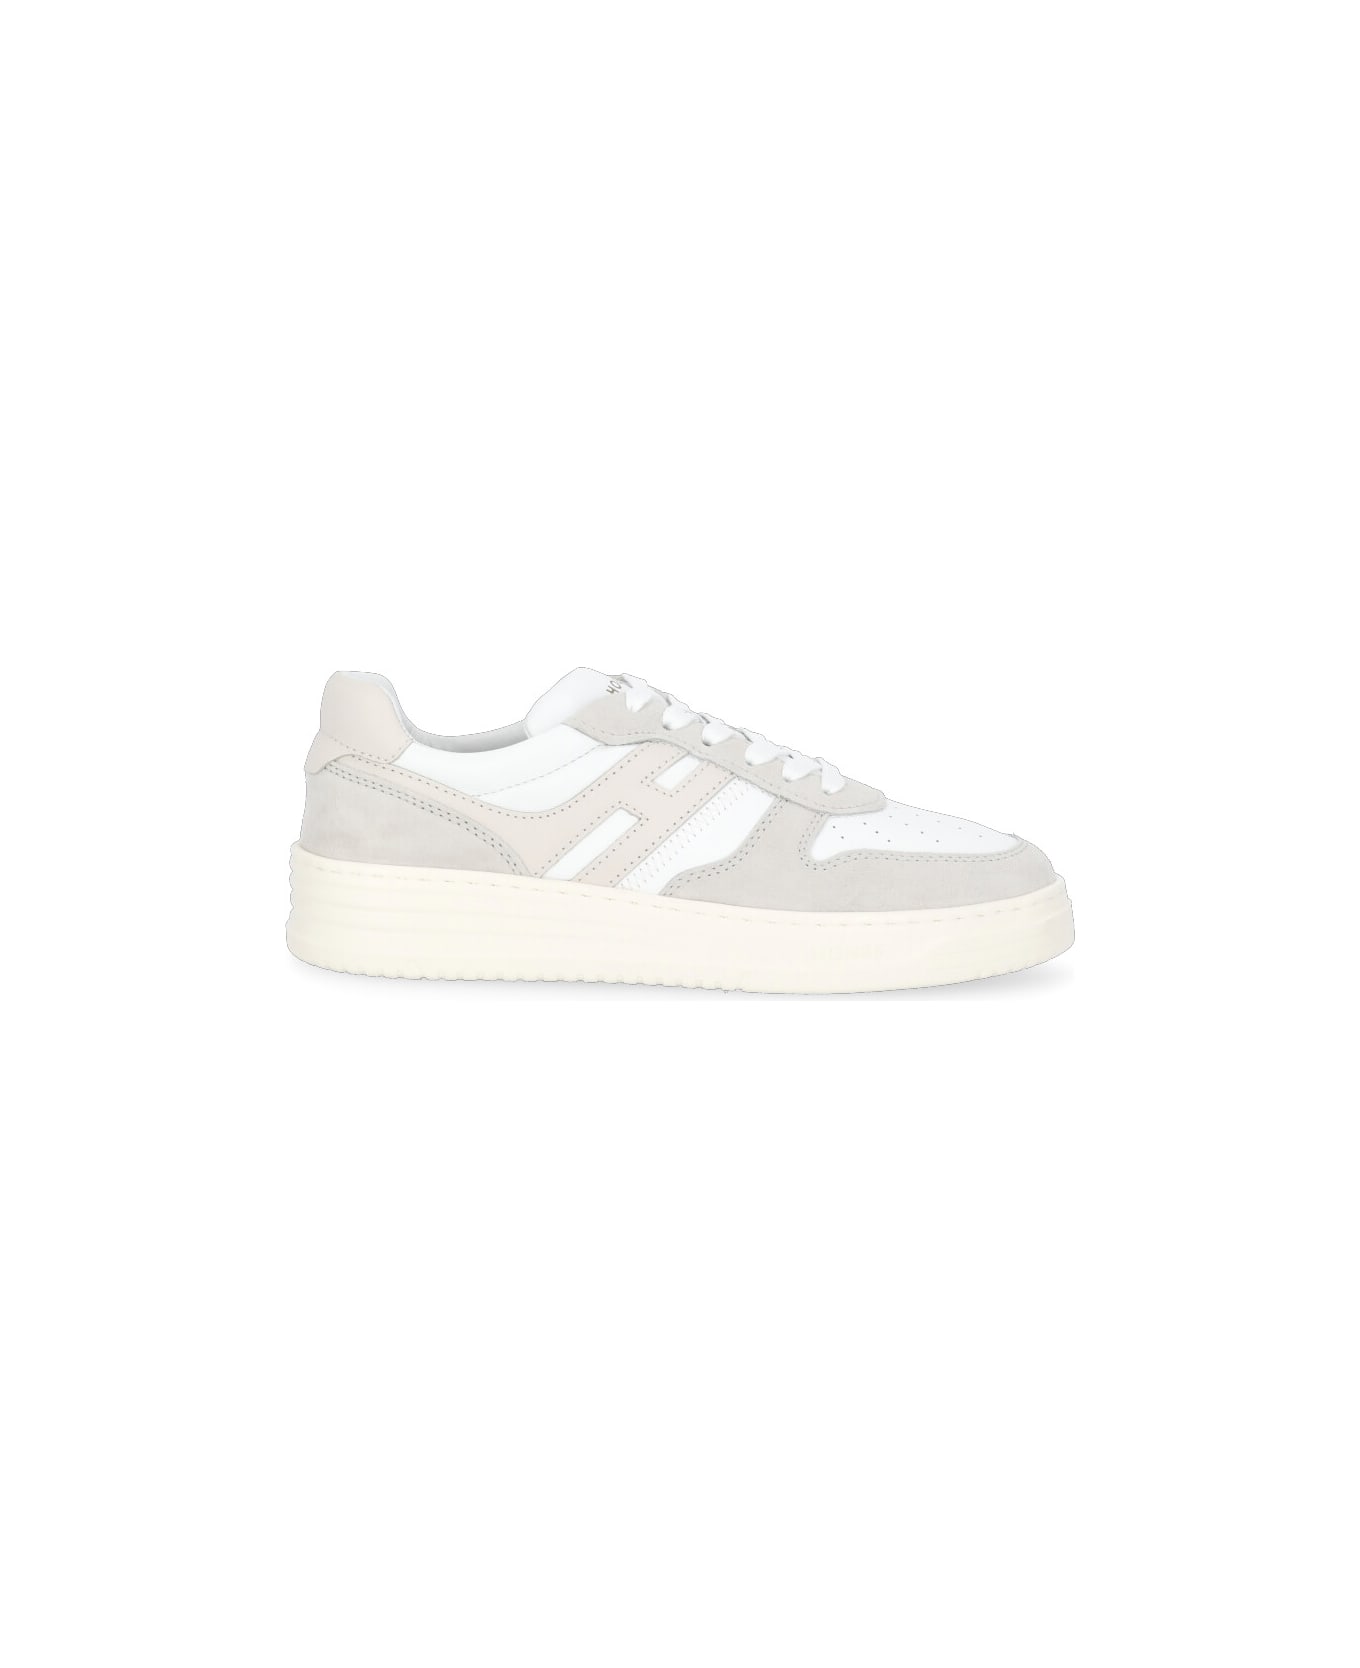 Hogan Sneakers "h630" Made Of Leather - Beige